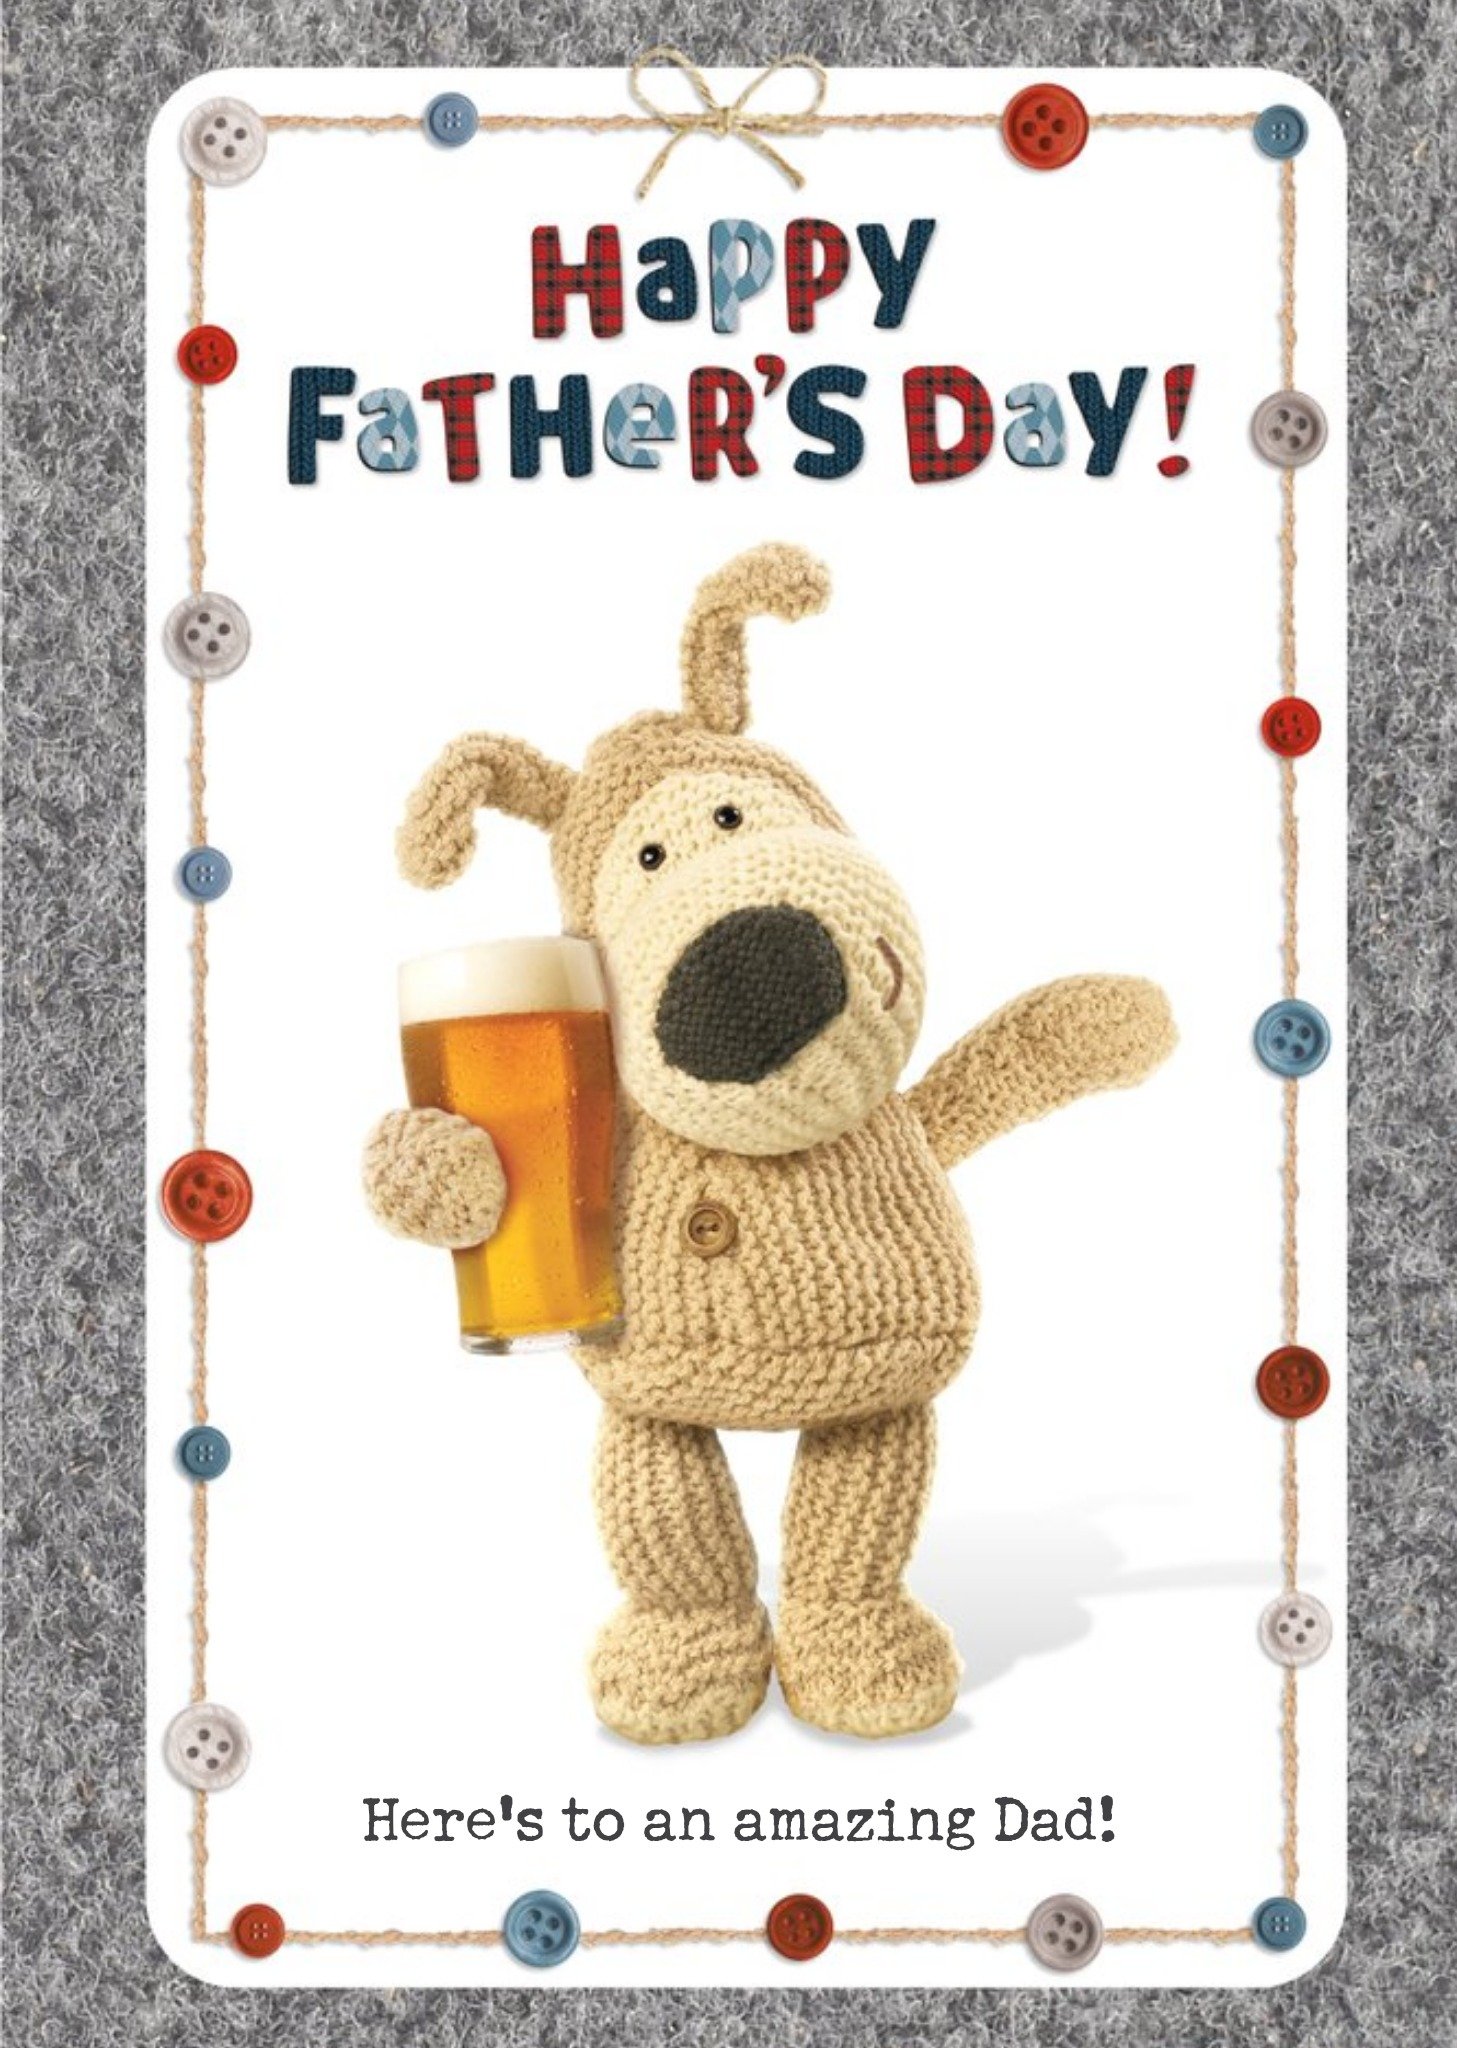 Boofle Puppy & Pint Happy Father's Day Card, Large